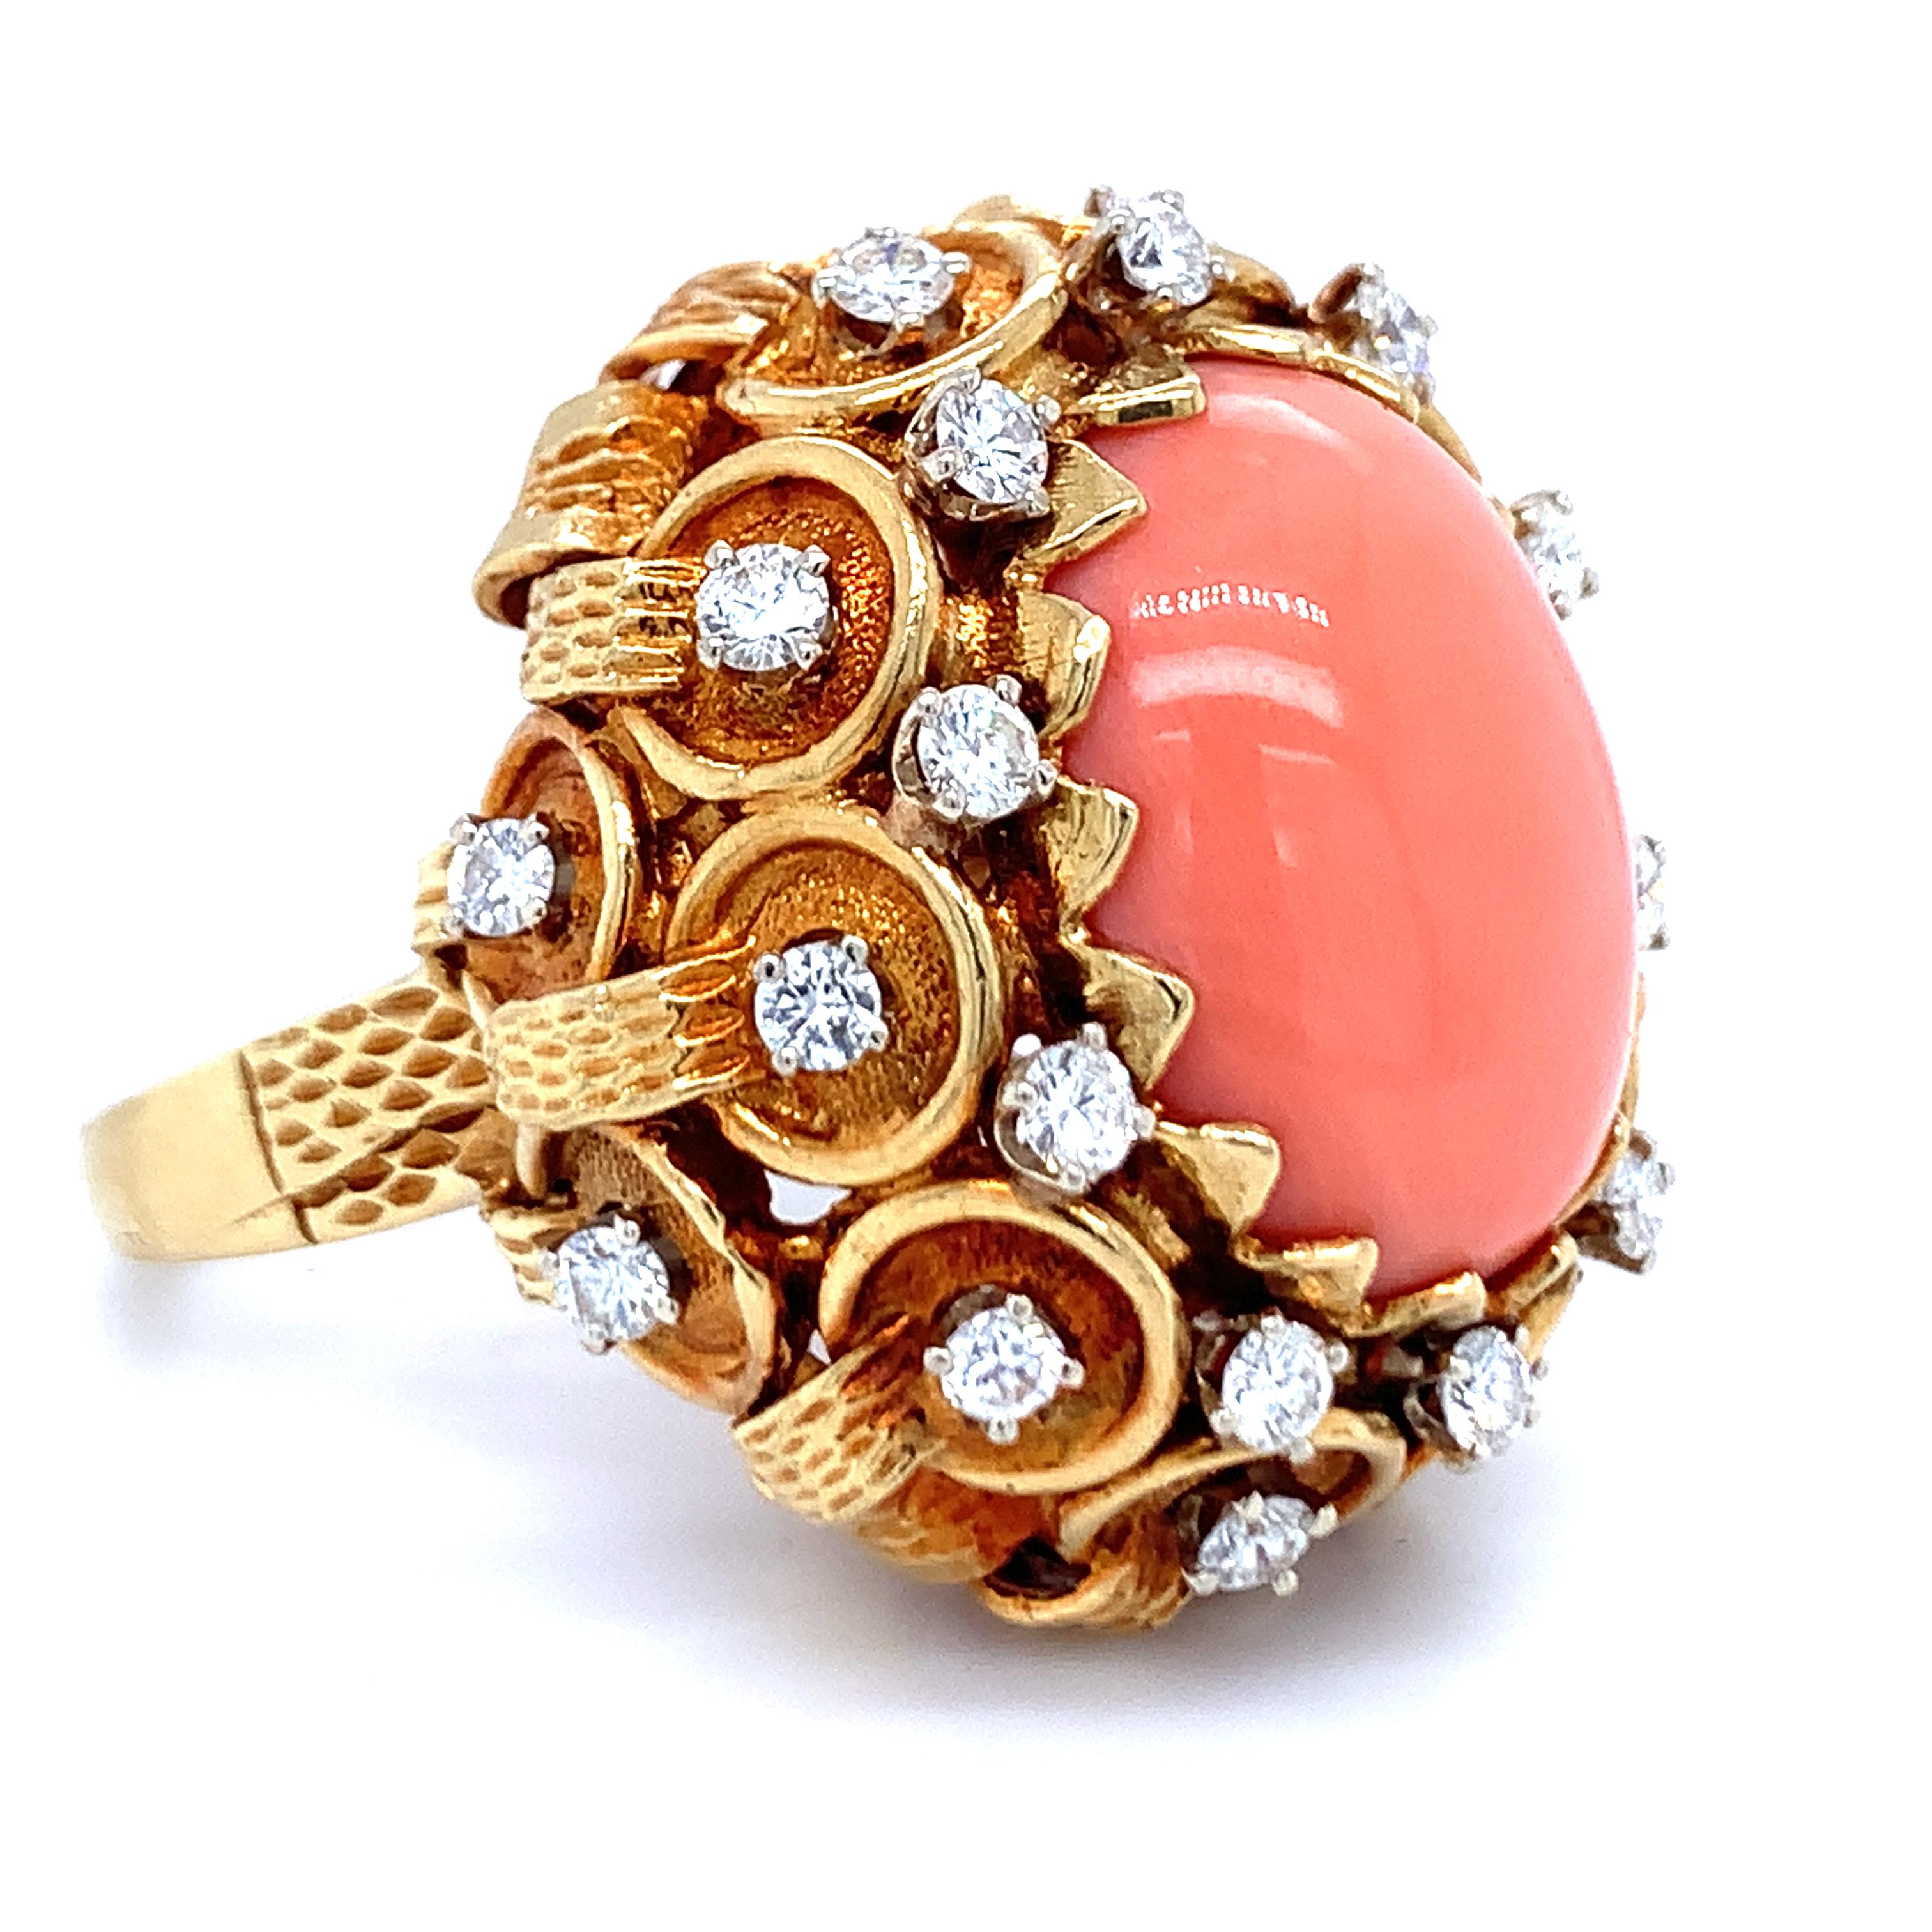 Pink coral and diamond 18K yellow gold ring featuring one oval pink coral stone measuring 20 x 15 millimeters in size. The ring is further enhanced by twenty-four round brilliant cut diamonds totaling 1.50 ct. with H color and VS-2 clarity.